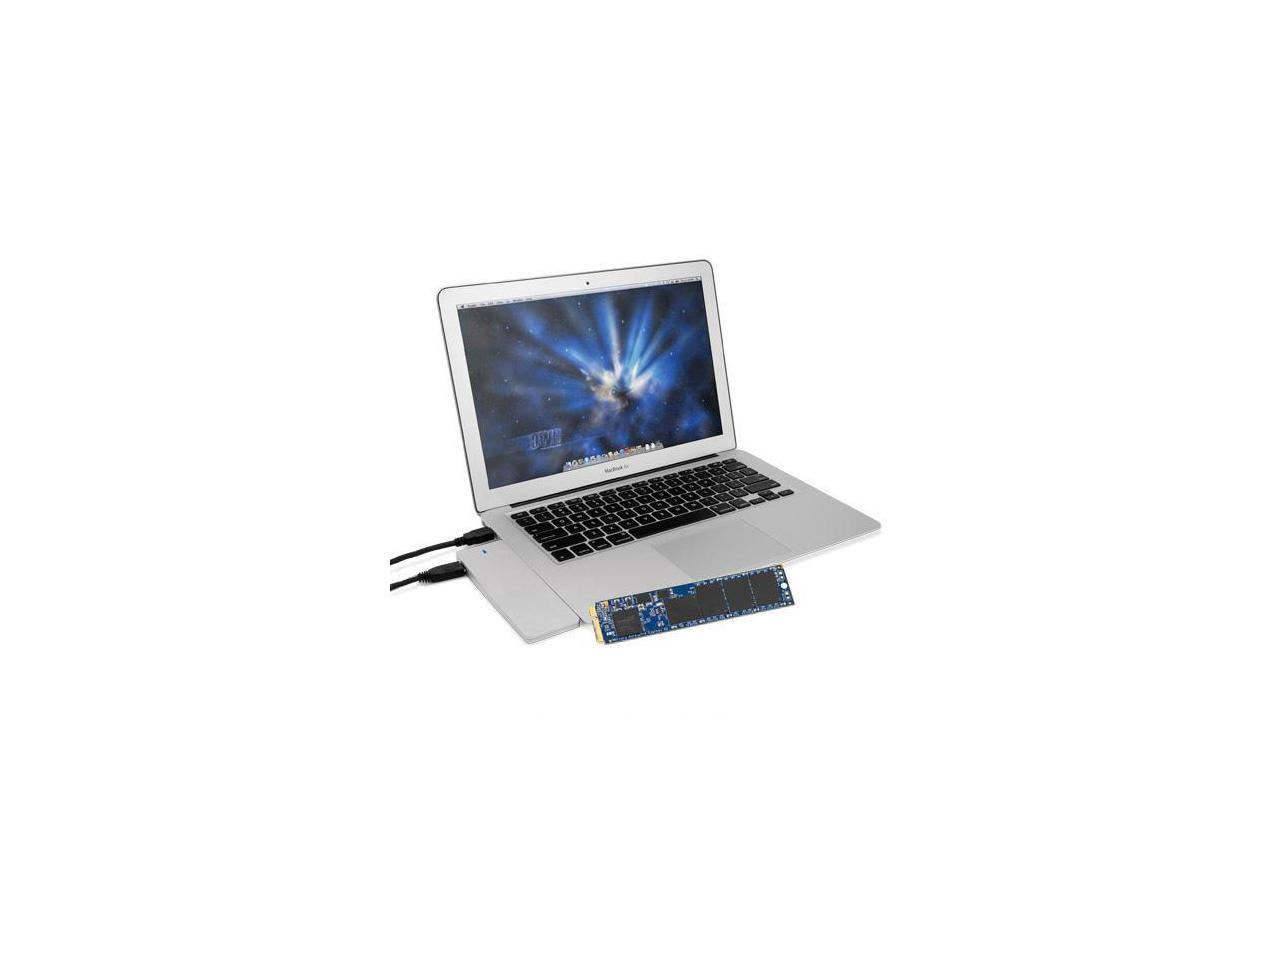 OWC 120GB Aura 6G SSD + Envoy Kit for MacBook Air 2010+2011: Complete Solution with Enclosure. Model OWCSSDA116K120